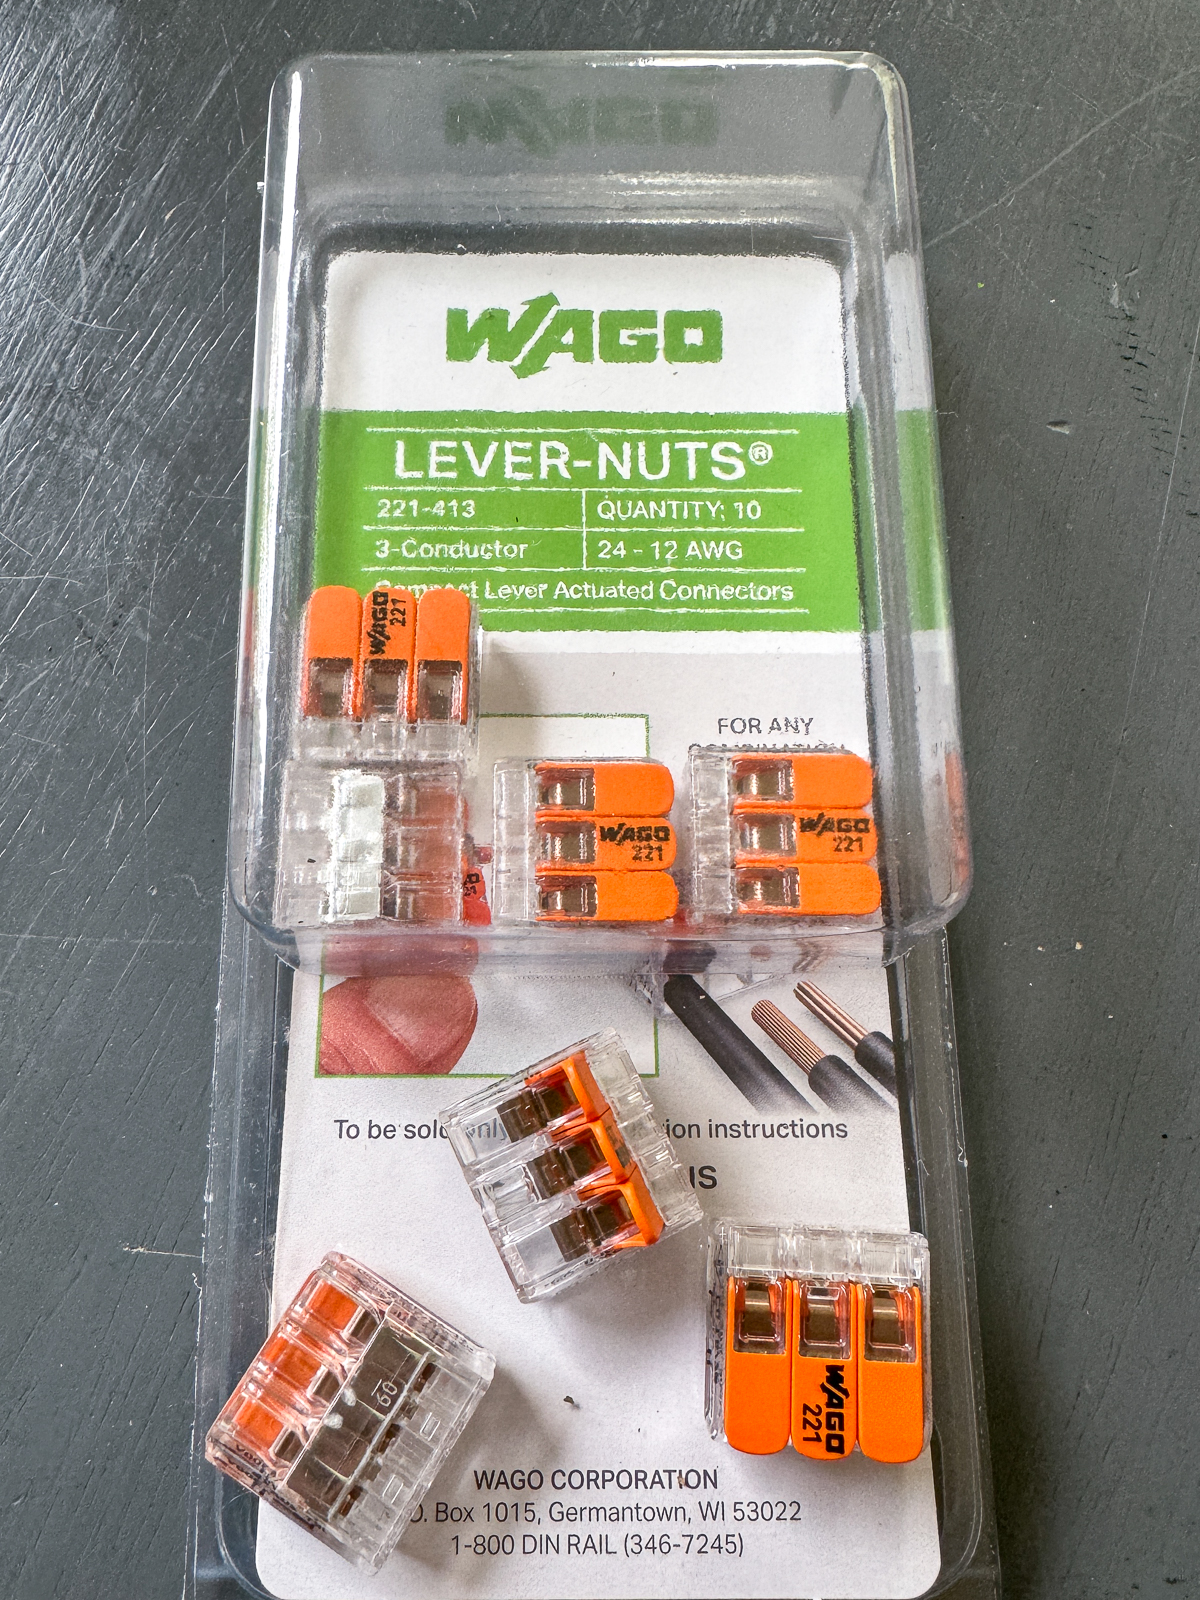 Wago lever-nuts package